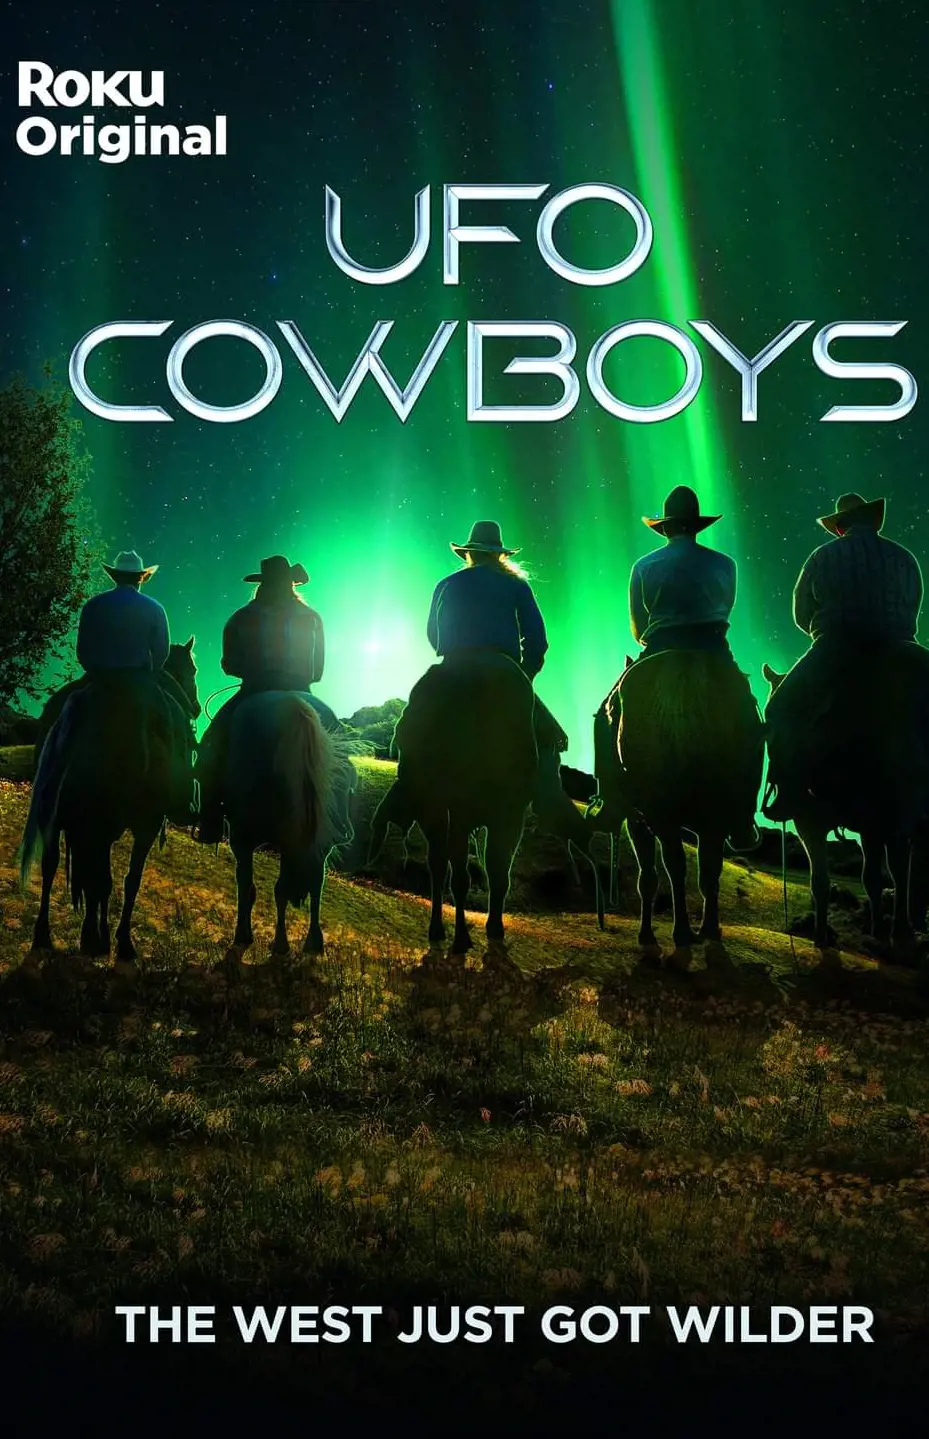 Ufo Cowboys follows a group of ranchers who research extraterrestrial encounters and supernatural activity in west